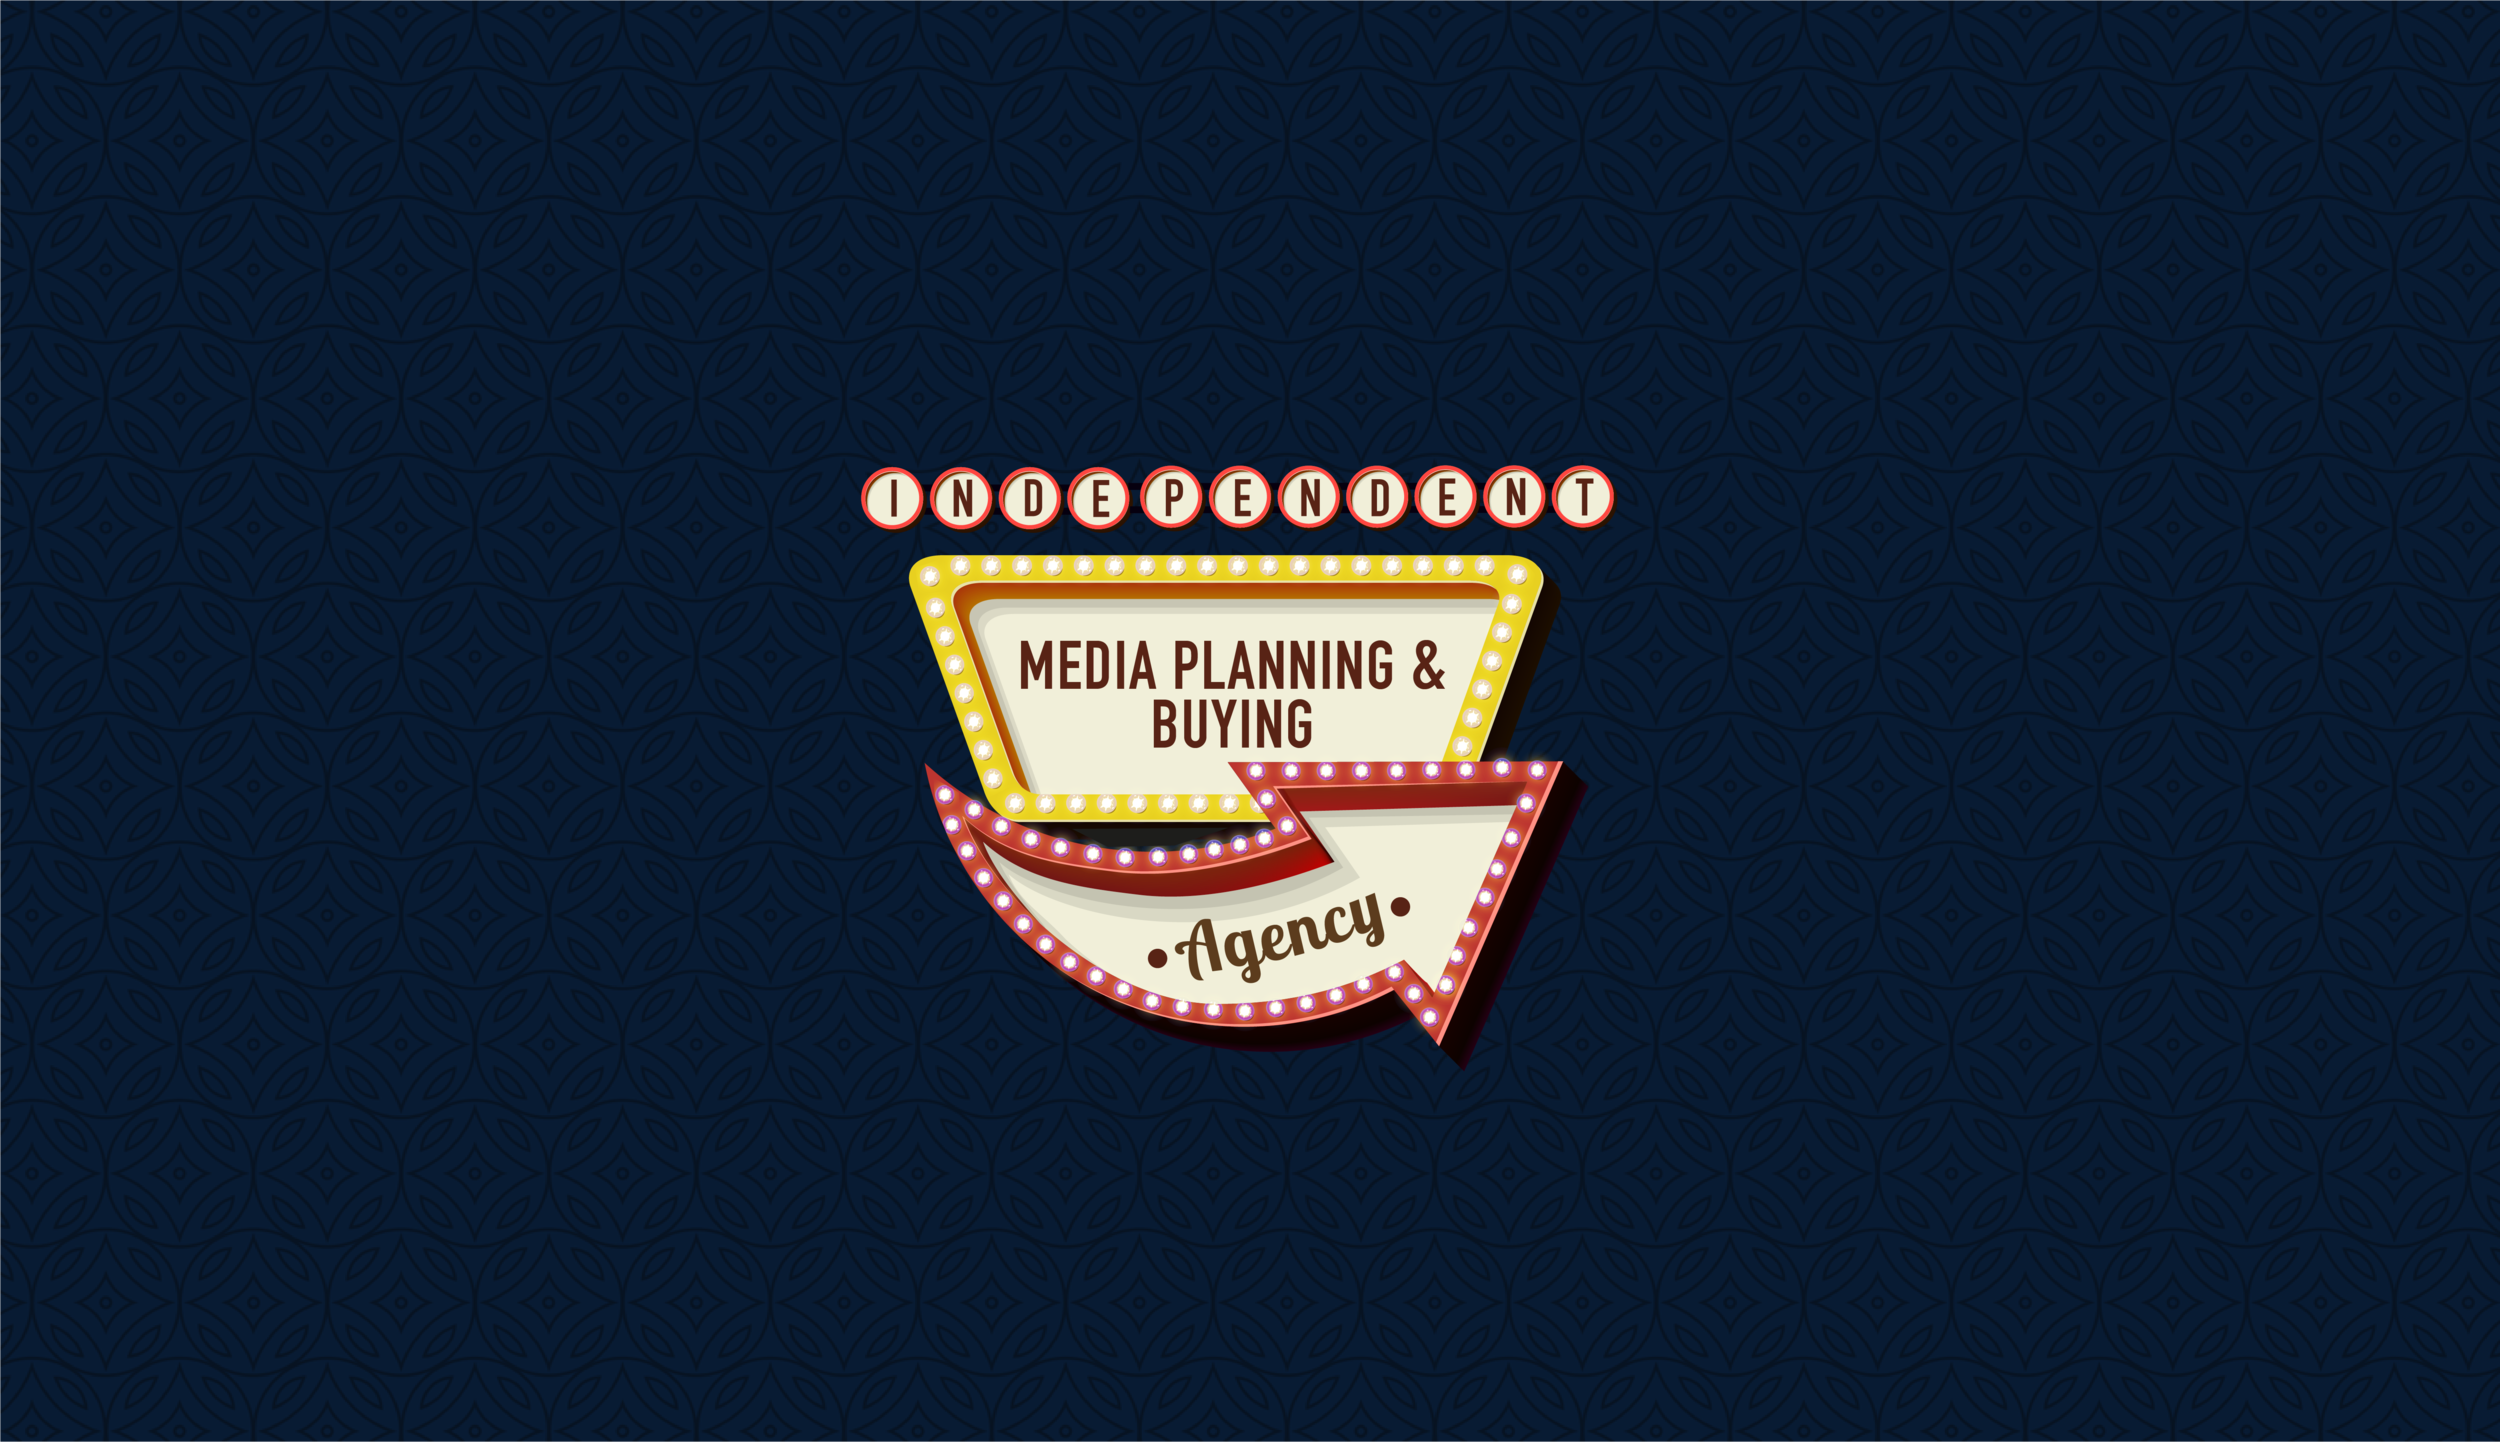 Independent Media Planning and Buying Agency